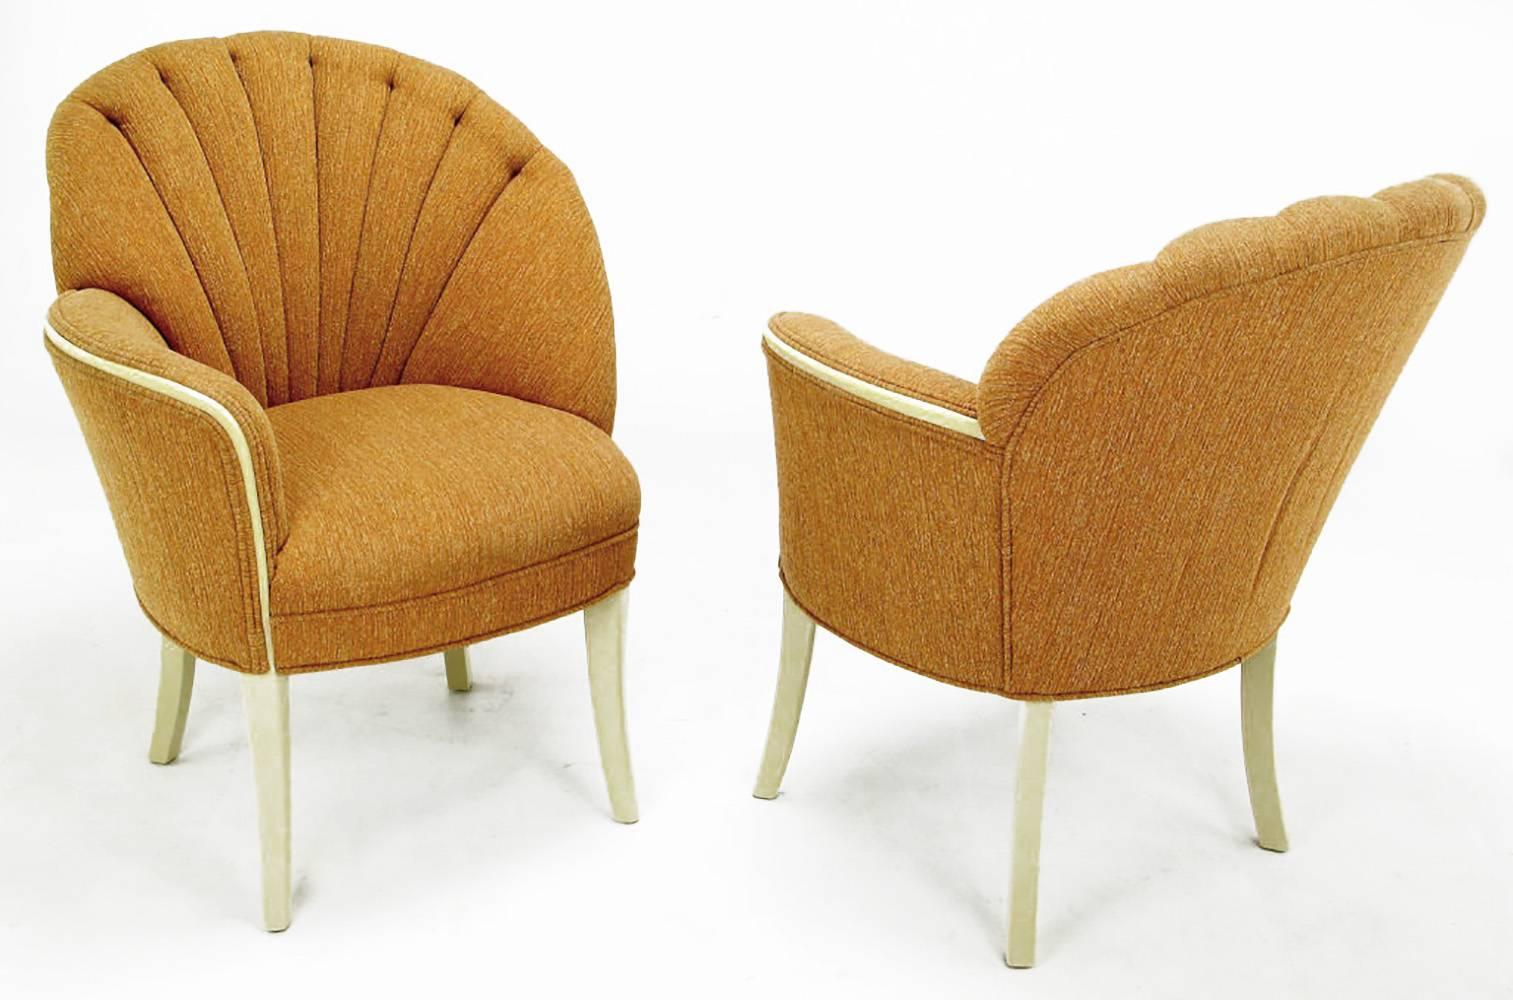 Elegant pair of mirror image Art Deco shell back fireside chairs in heathered cinnamon-orange upholstery. Solid mahogany frames and legs have been refreshed with new taupe lacquer. Second pair in different upholstery and mahogany wood frame